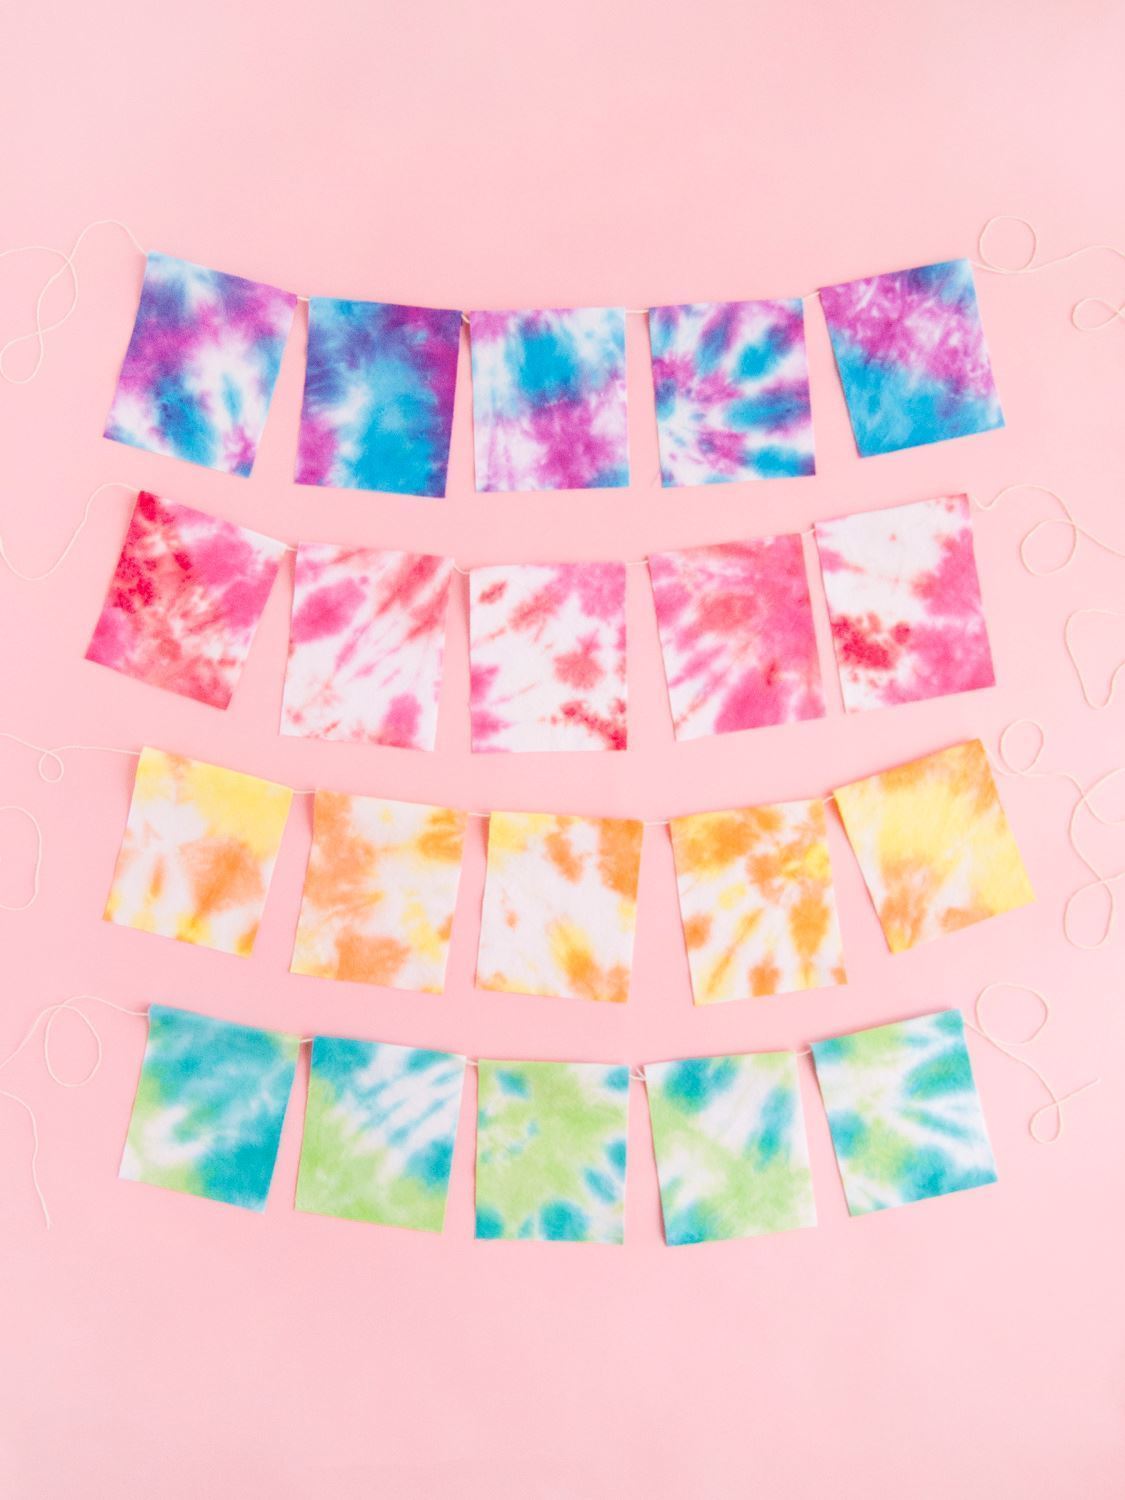 Tie-Dye Party Pennant Garland